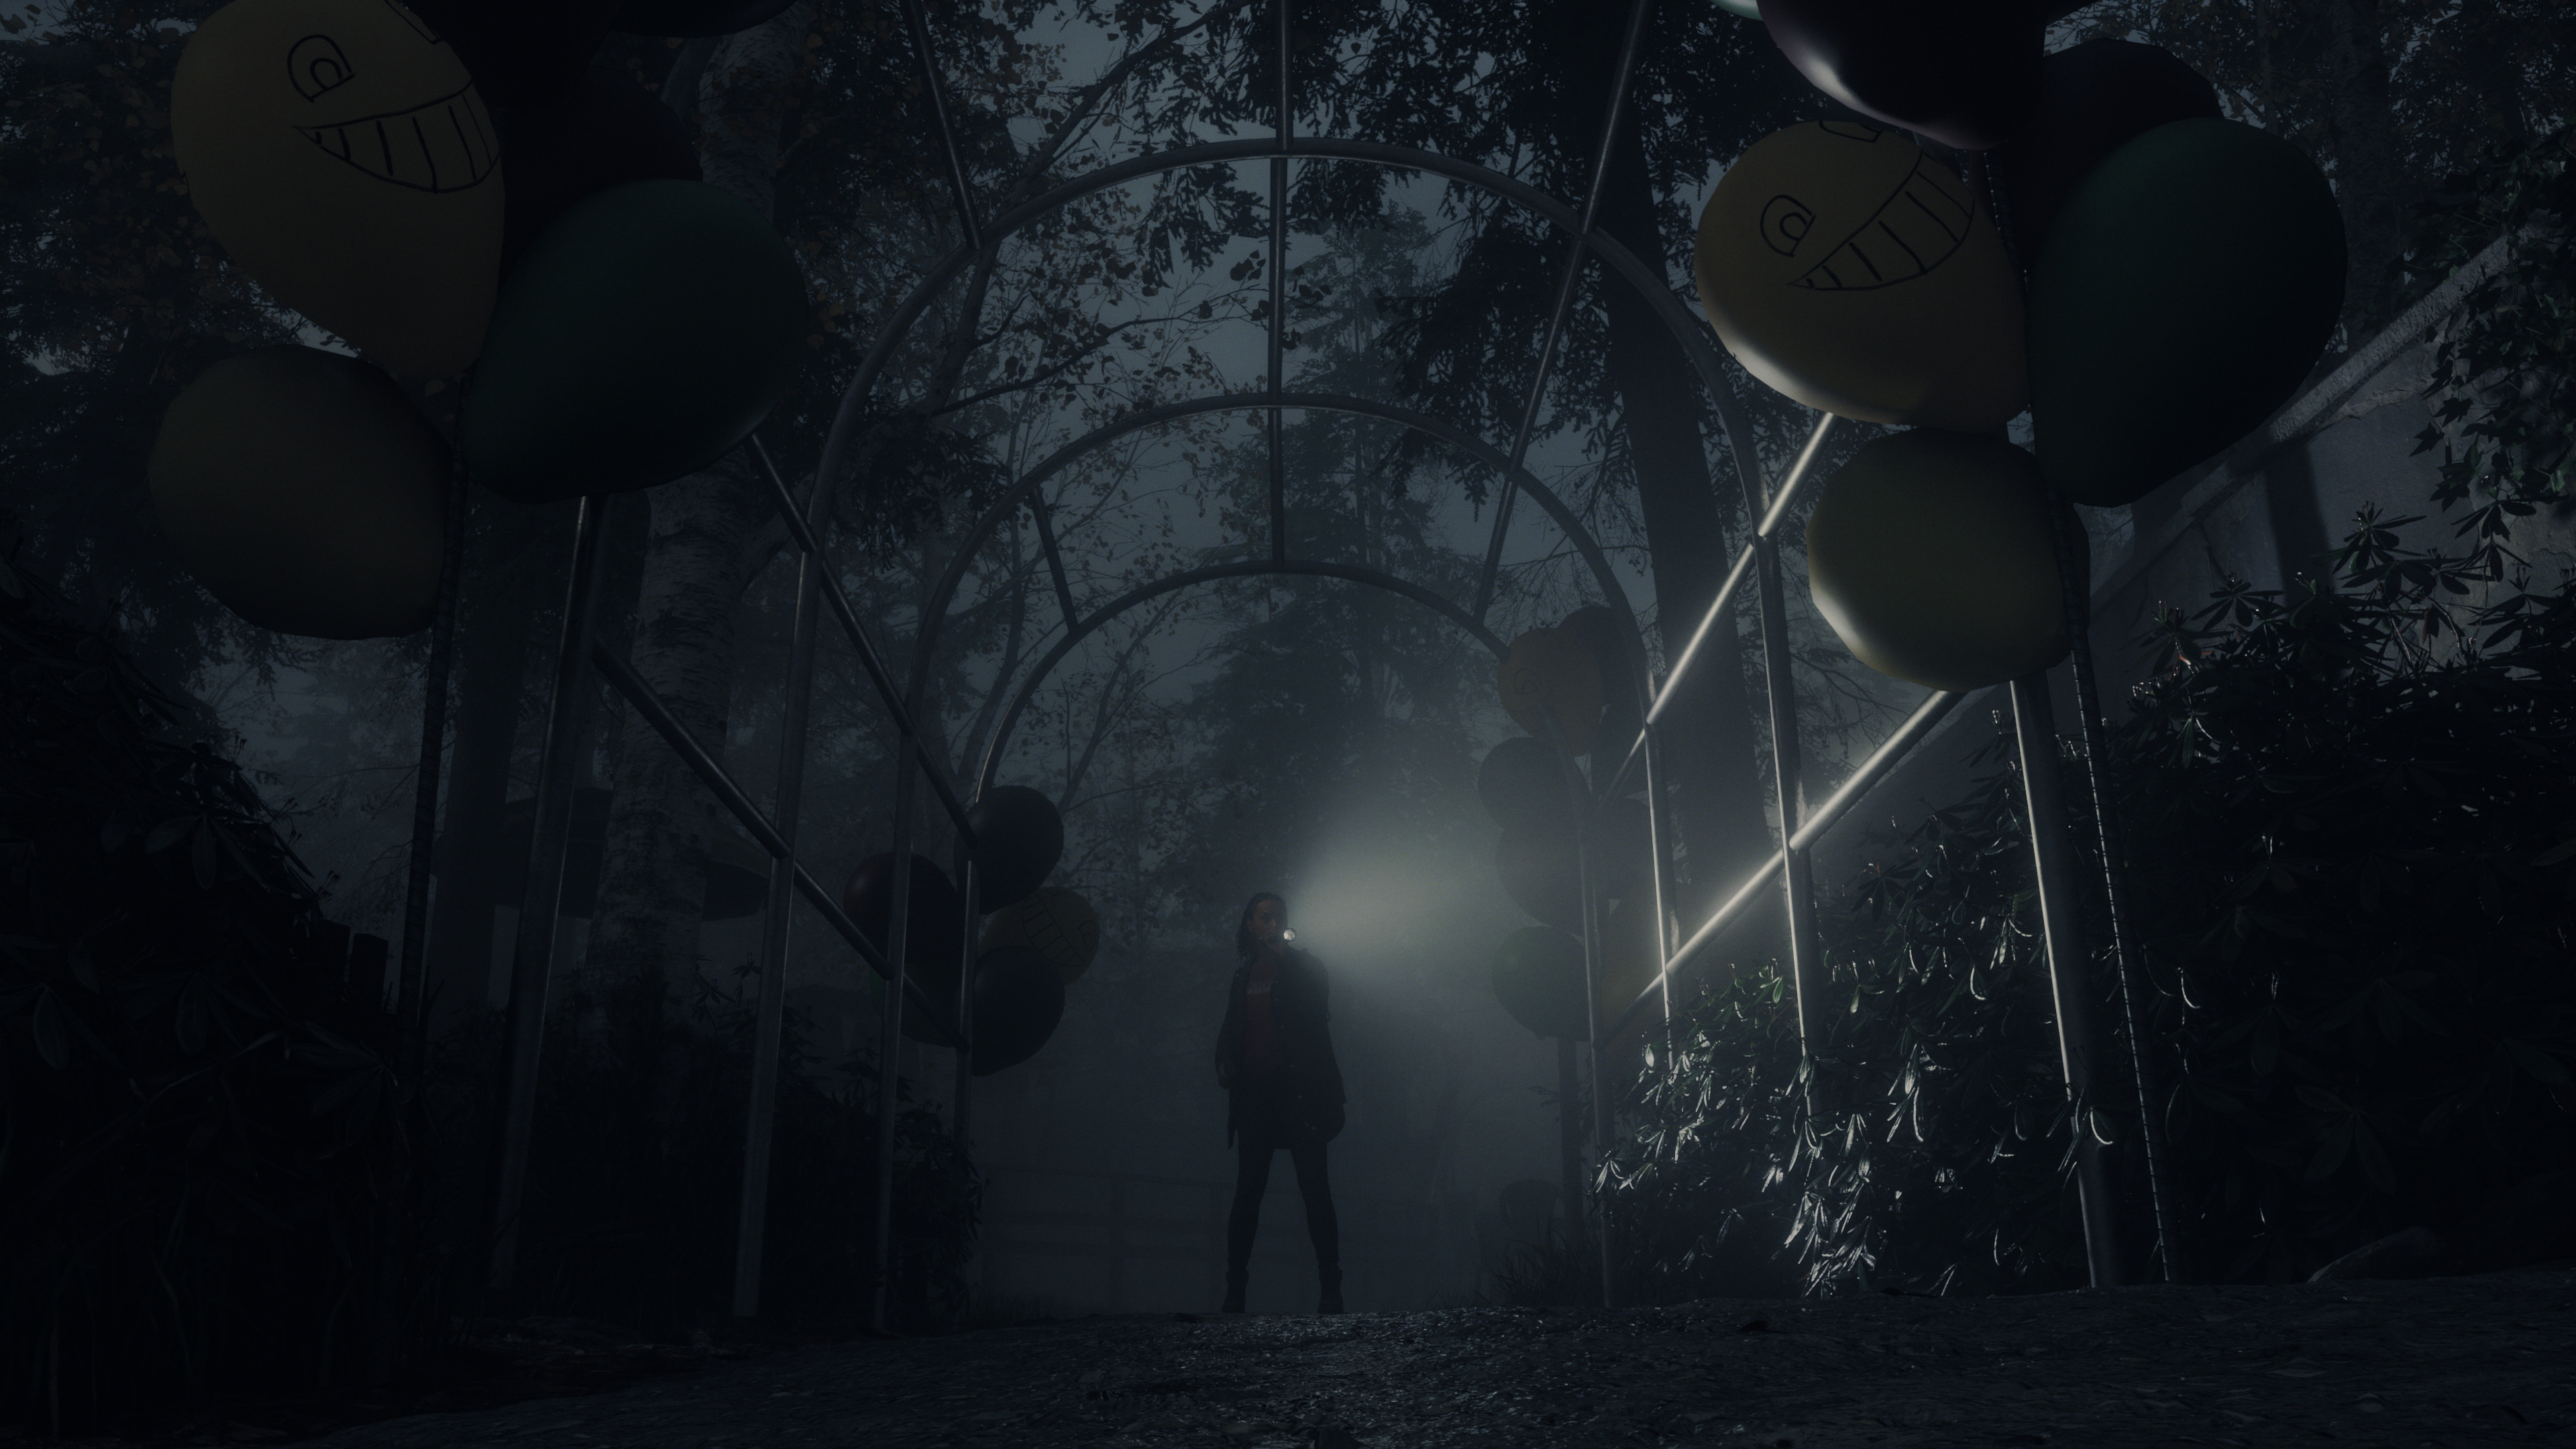 Why Remedy is glad it took 13 years to make Alan Wake 2